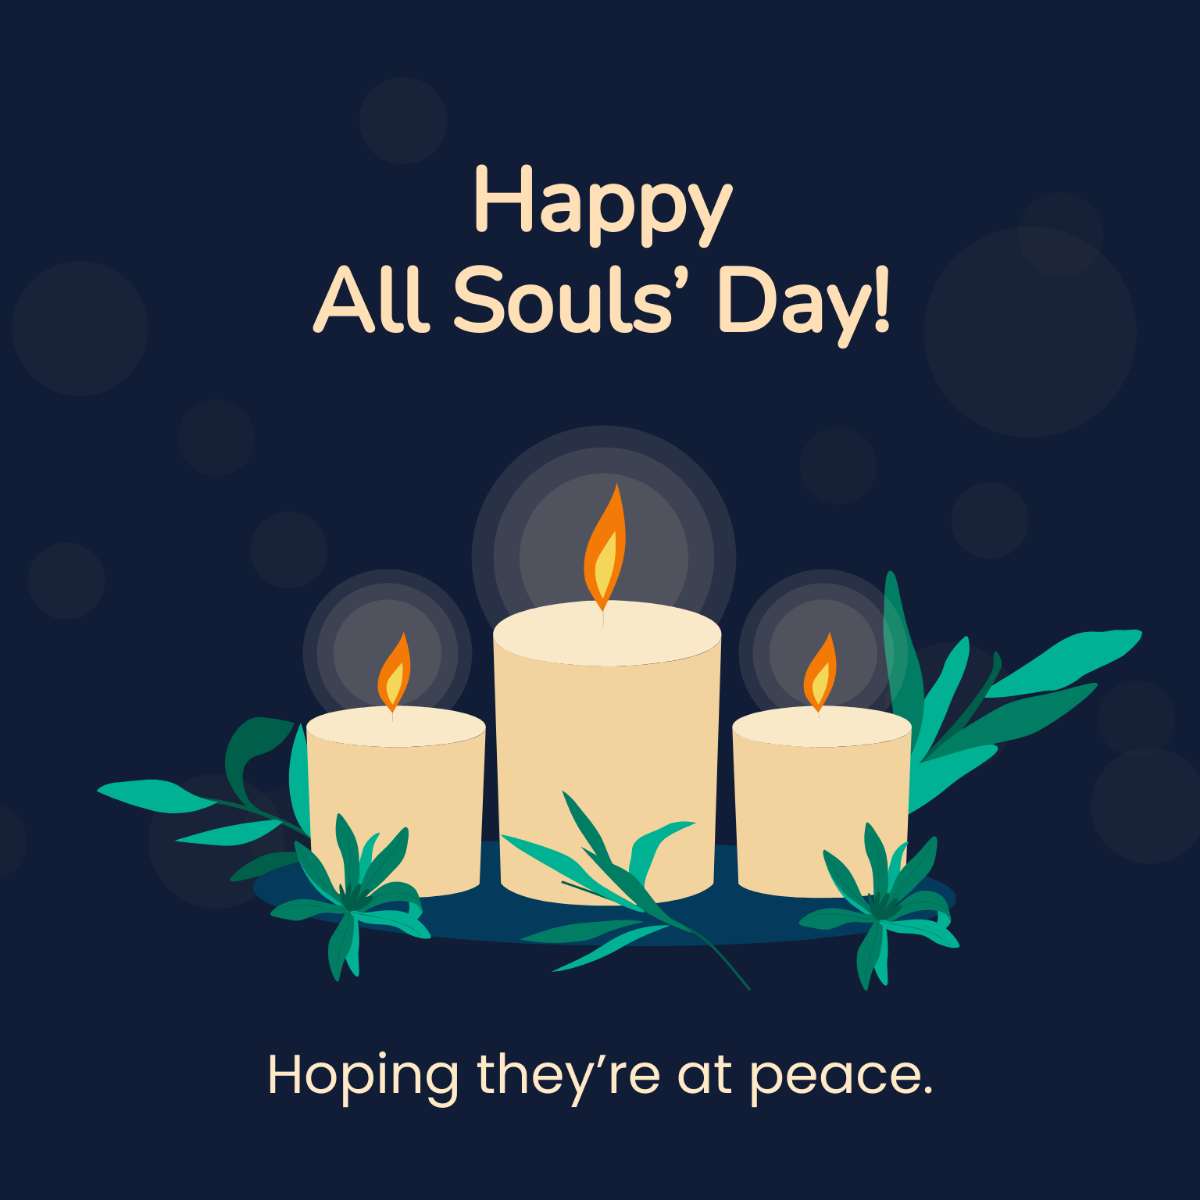 All Souls' Day Greeting Card Vector